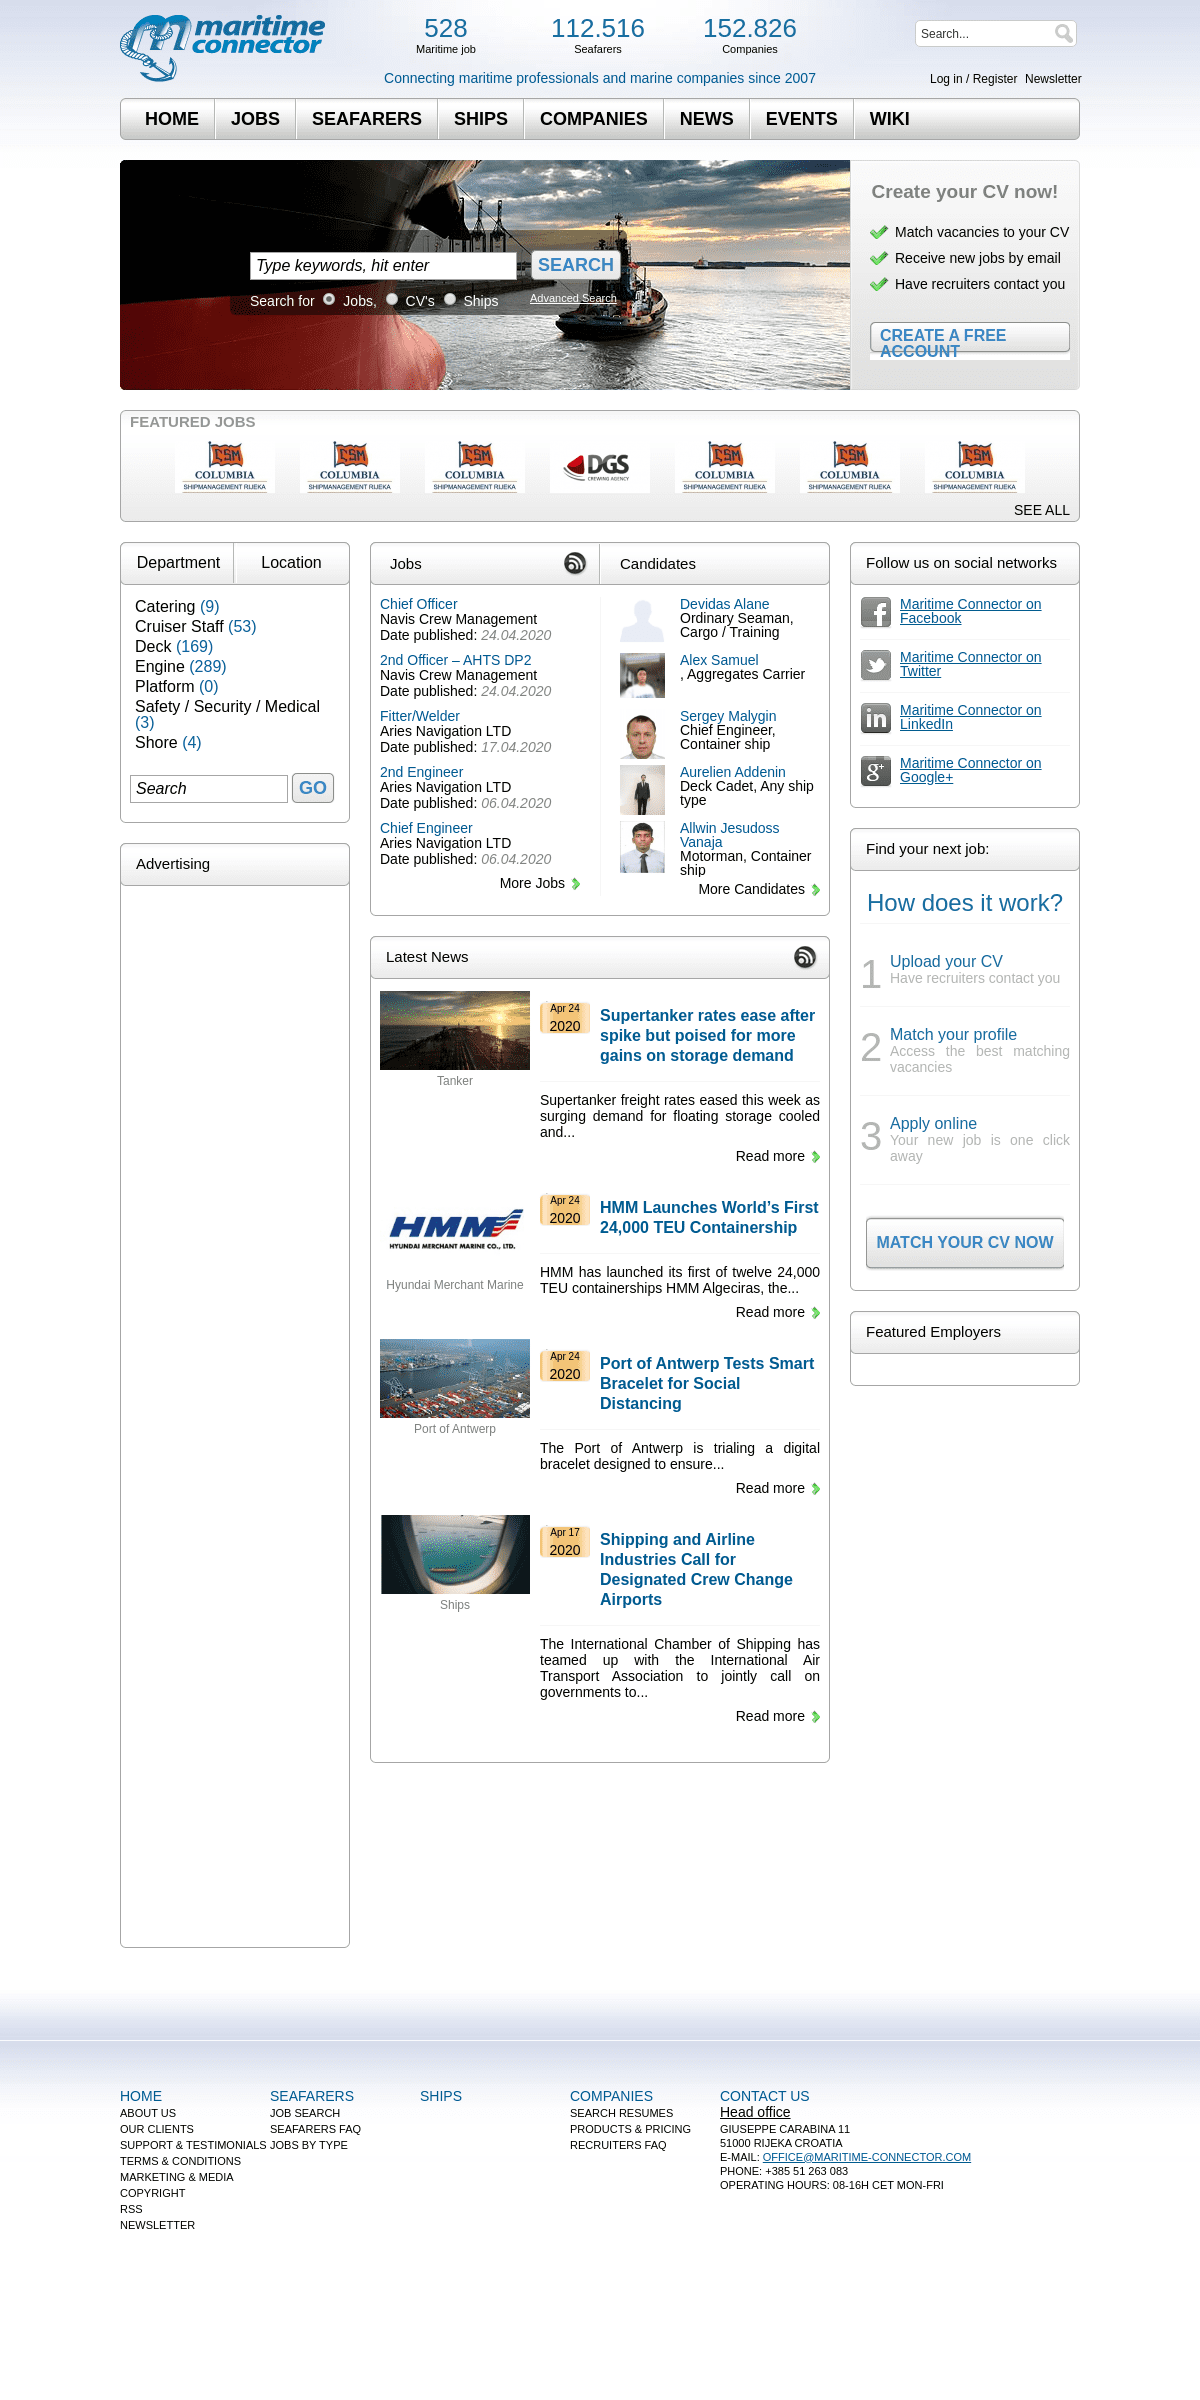 A complete backup of maritime-connector.com